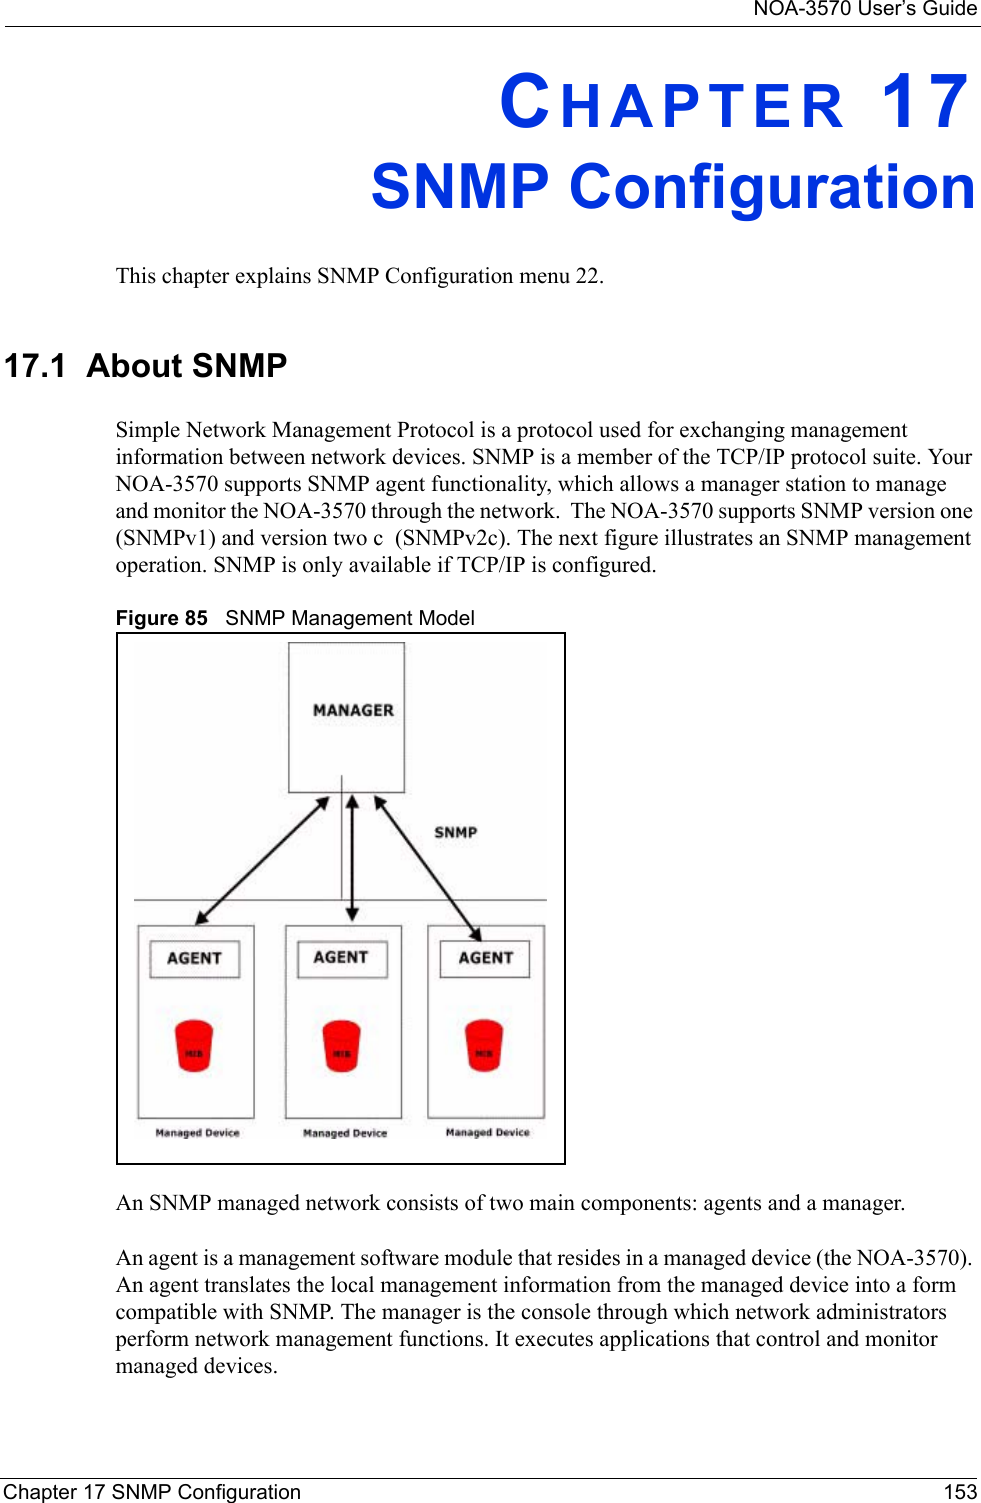 NOA-3570 User’s GuideChapter 17 SNMP Configuration 153CHAPTER 17SNMP ConfigurationThis chapter explains SNMP Configuration menu 22.17.1  About SNMPSimple Network Management Protocol is a protocol used for exchanging management information between network devices. SNMP is a member of the TCP/IP protocol suite. Your NOA-3570 supports SNMP agent functionality, which allows a manager station to manage and monitor the NOA-3570 through the network.  The NOA-3570 supports SNMP version one (SNMPv1) and version two c  (SNMPv2c). The next figure illustrates an SNMP management operation. SNMP is only available if TCP/IP is configured.Figure 85   SNMP Management ModelAn SNMP managed network consists of two main components: agents and a manager. An agent is a management software module that resides in a managed device (the NOA-3570). An agent translates the local management information from the managed device into a form compatible with SNMP. The manager is the console through which network administrators perform network management functions. It executes applications that control and monitor managed devices. 